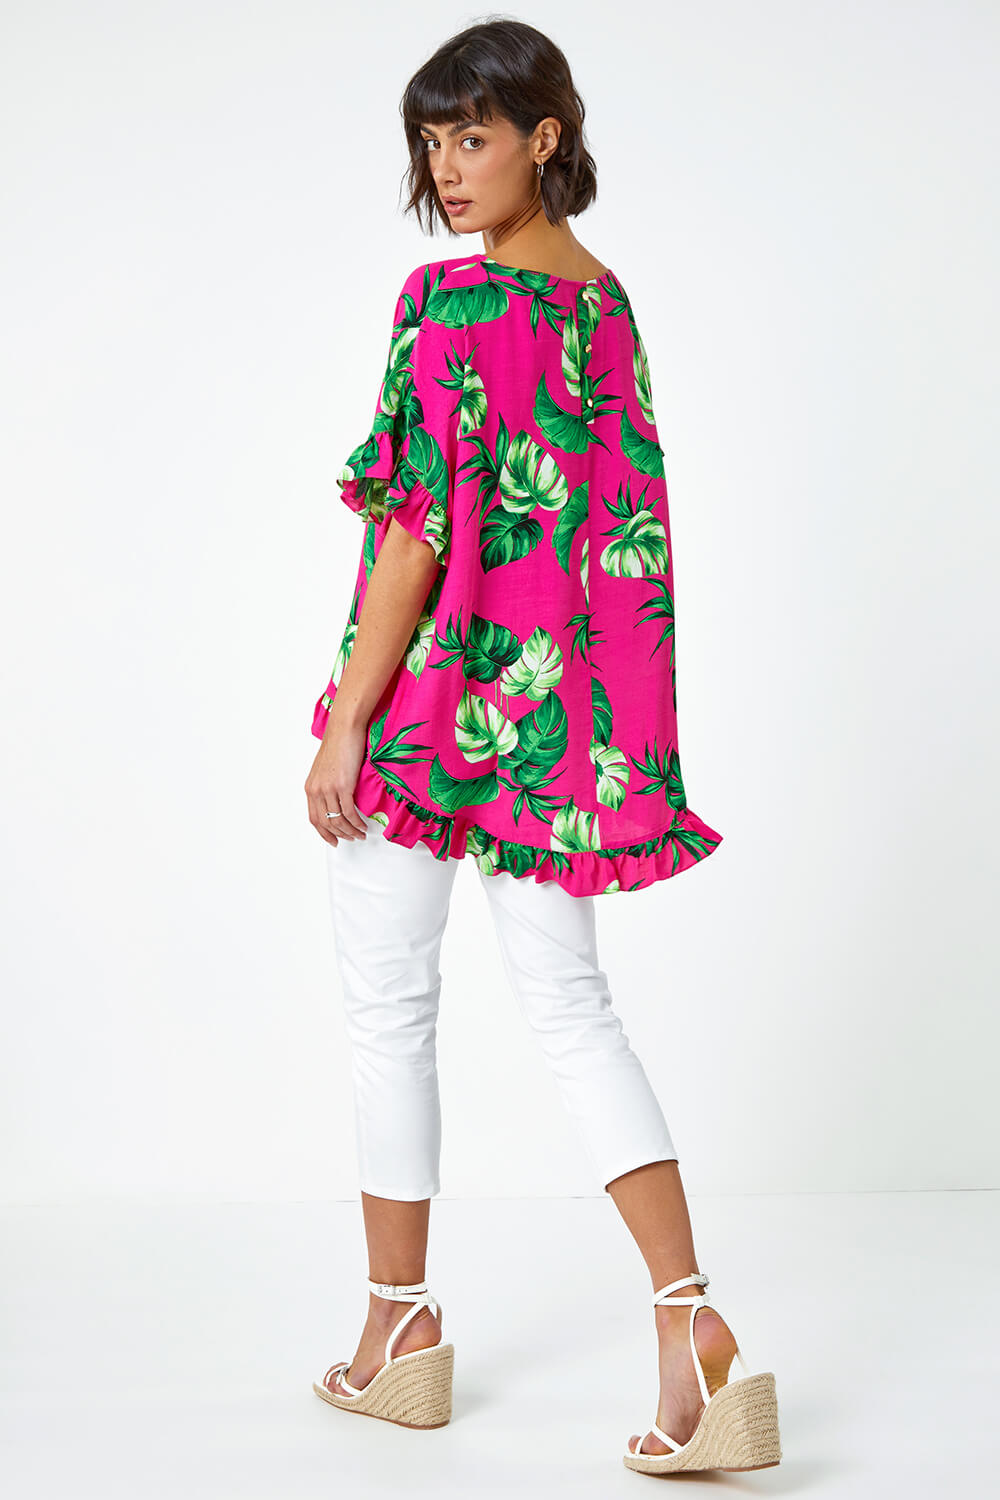 PINK Palm Print Frill Detail Oversized Top, Image 3 of 5